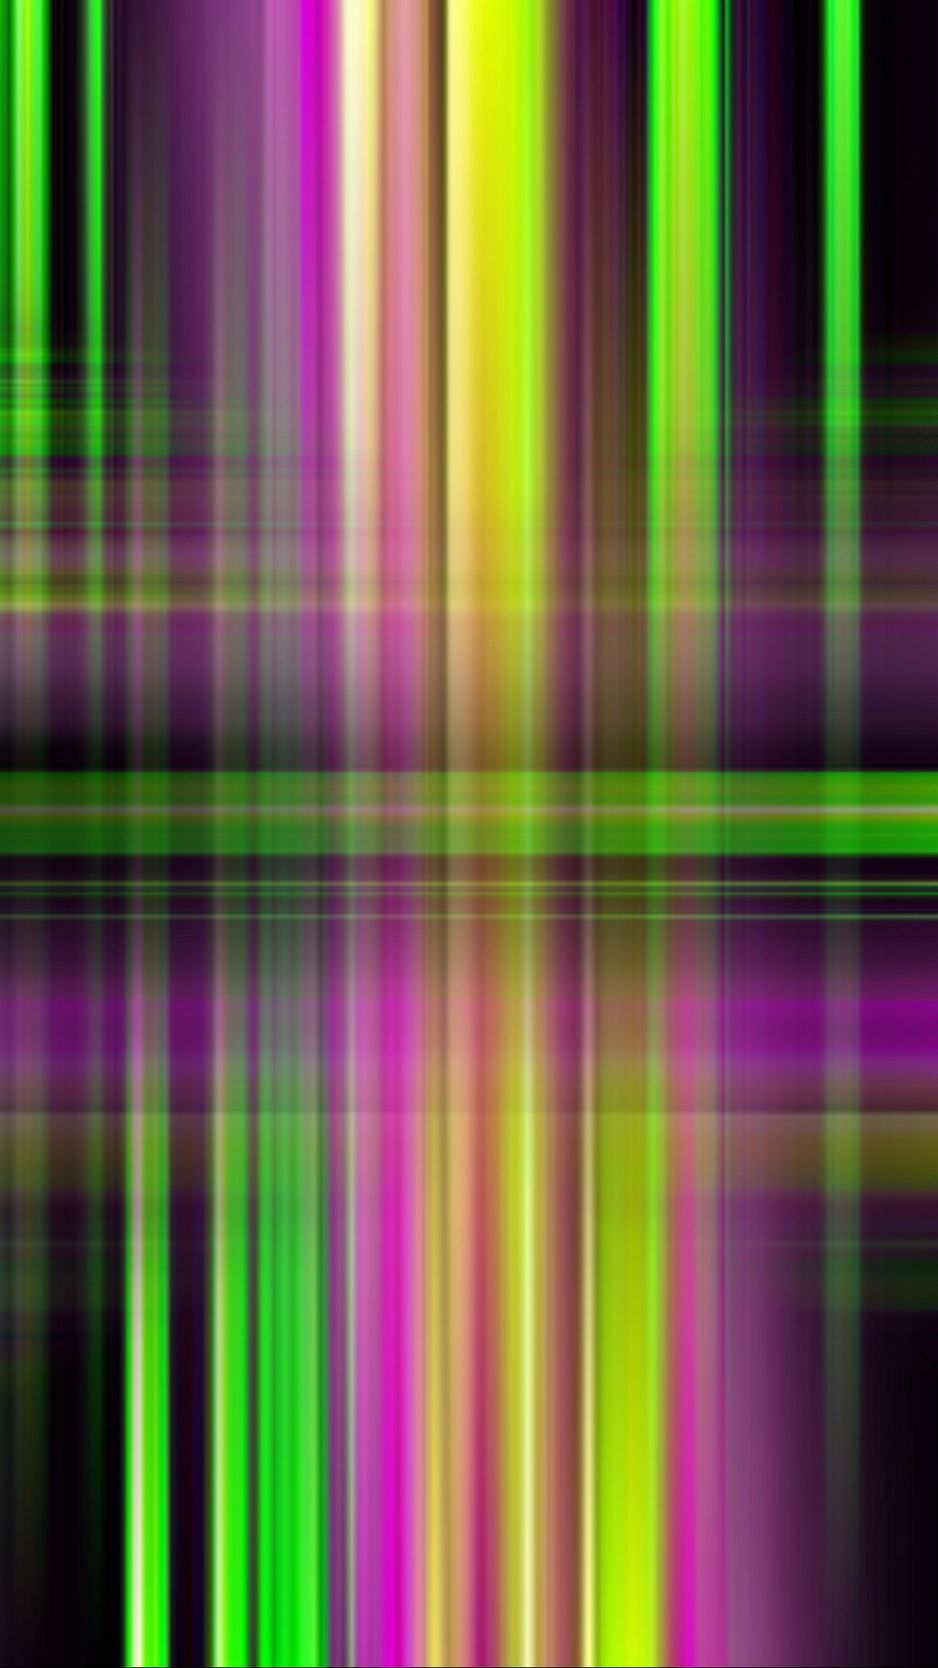 Download wallpapers 938x1668 lines, stripes, purple, green iphone 8/7/6s/6 for parallax hd backgrounds